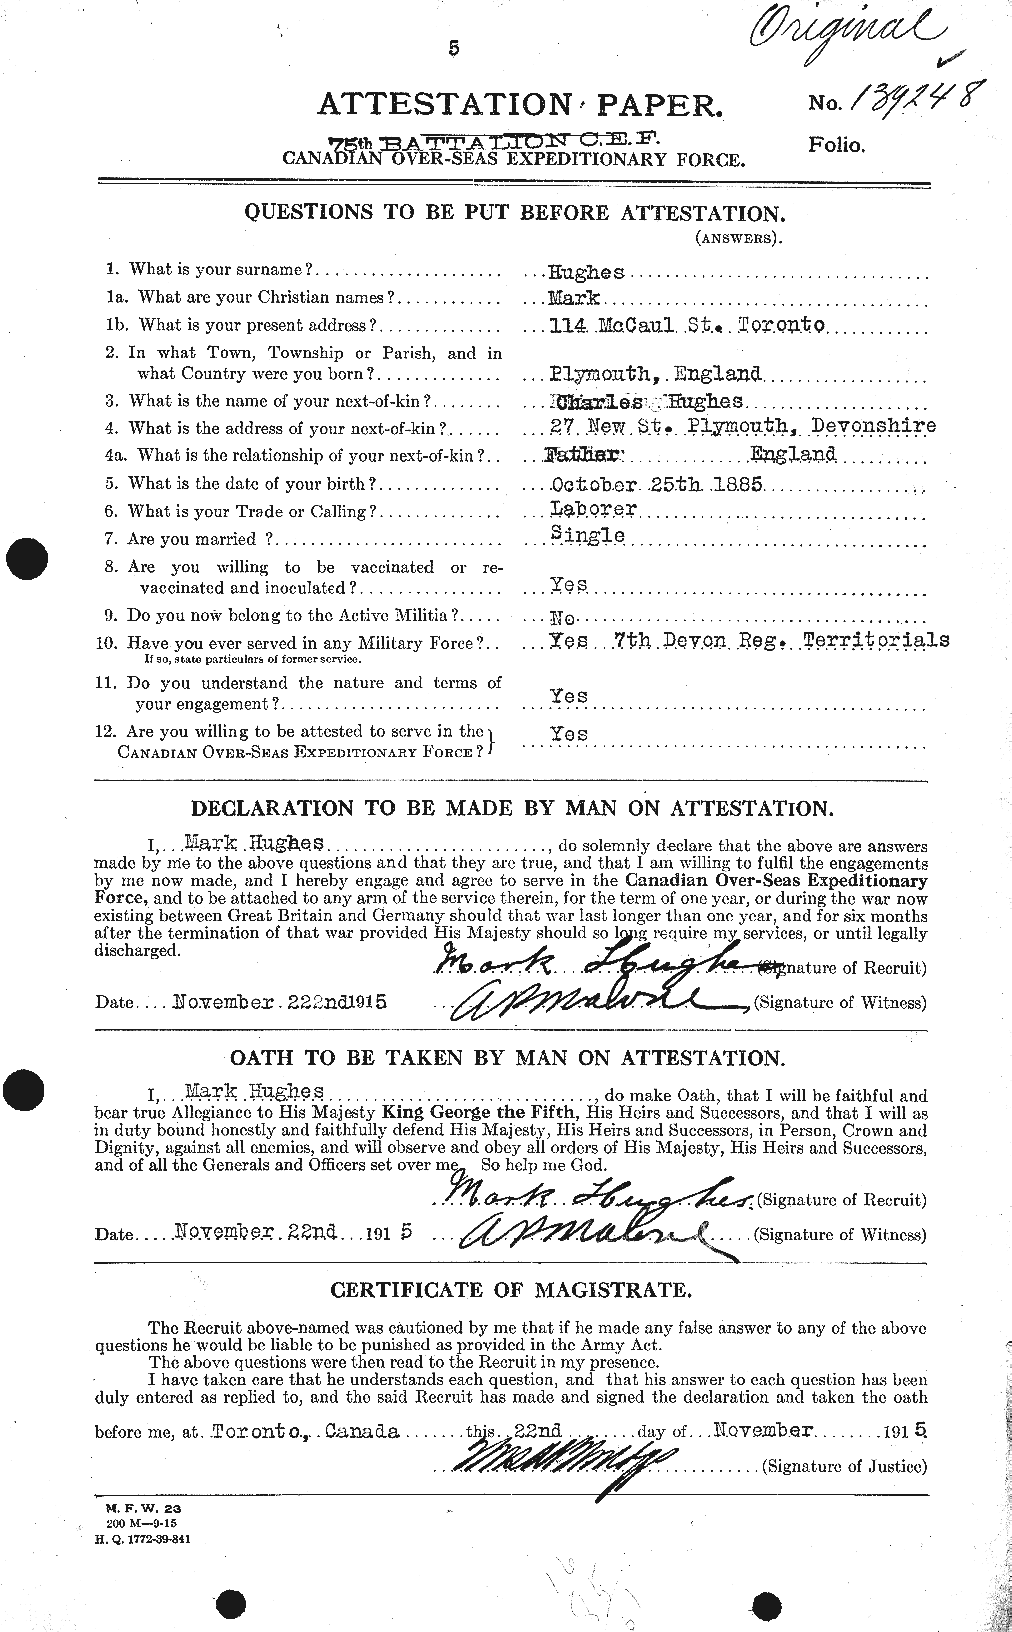 Personnel Records of the First World War - CEF 404115a